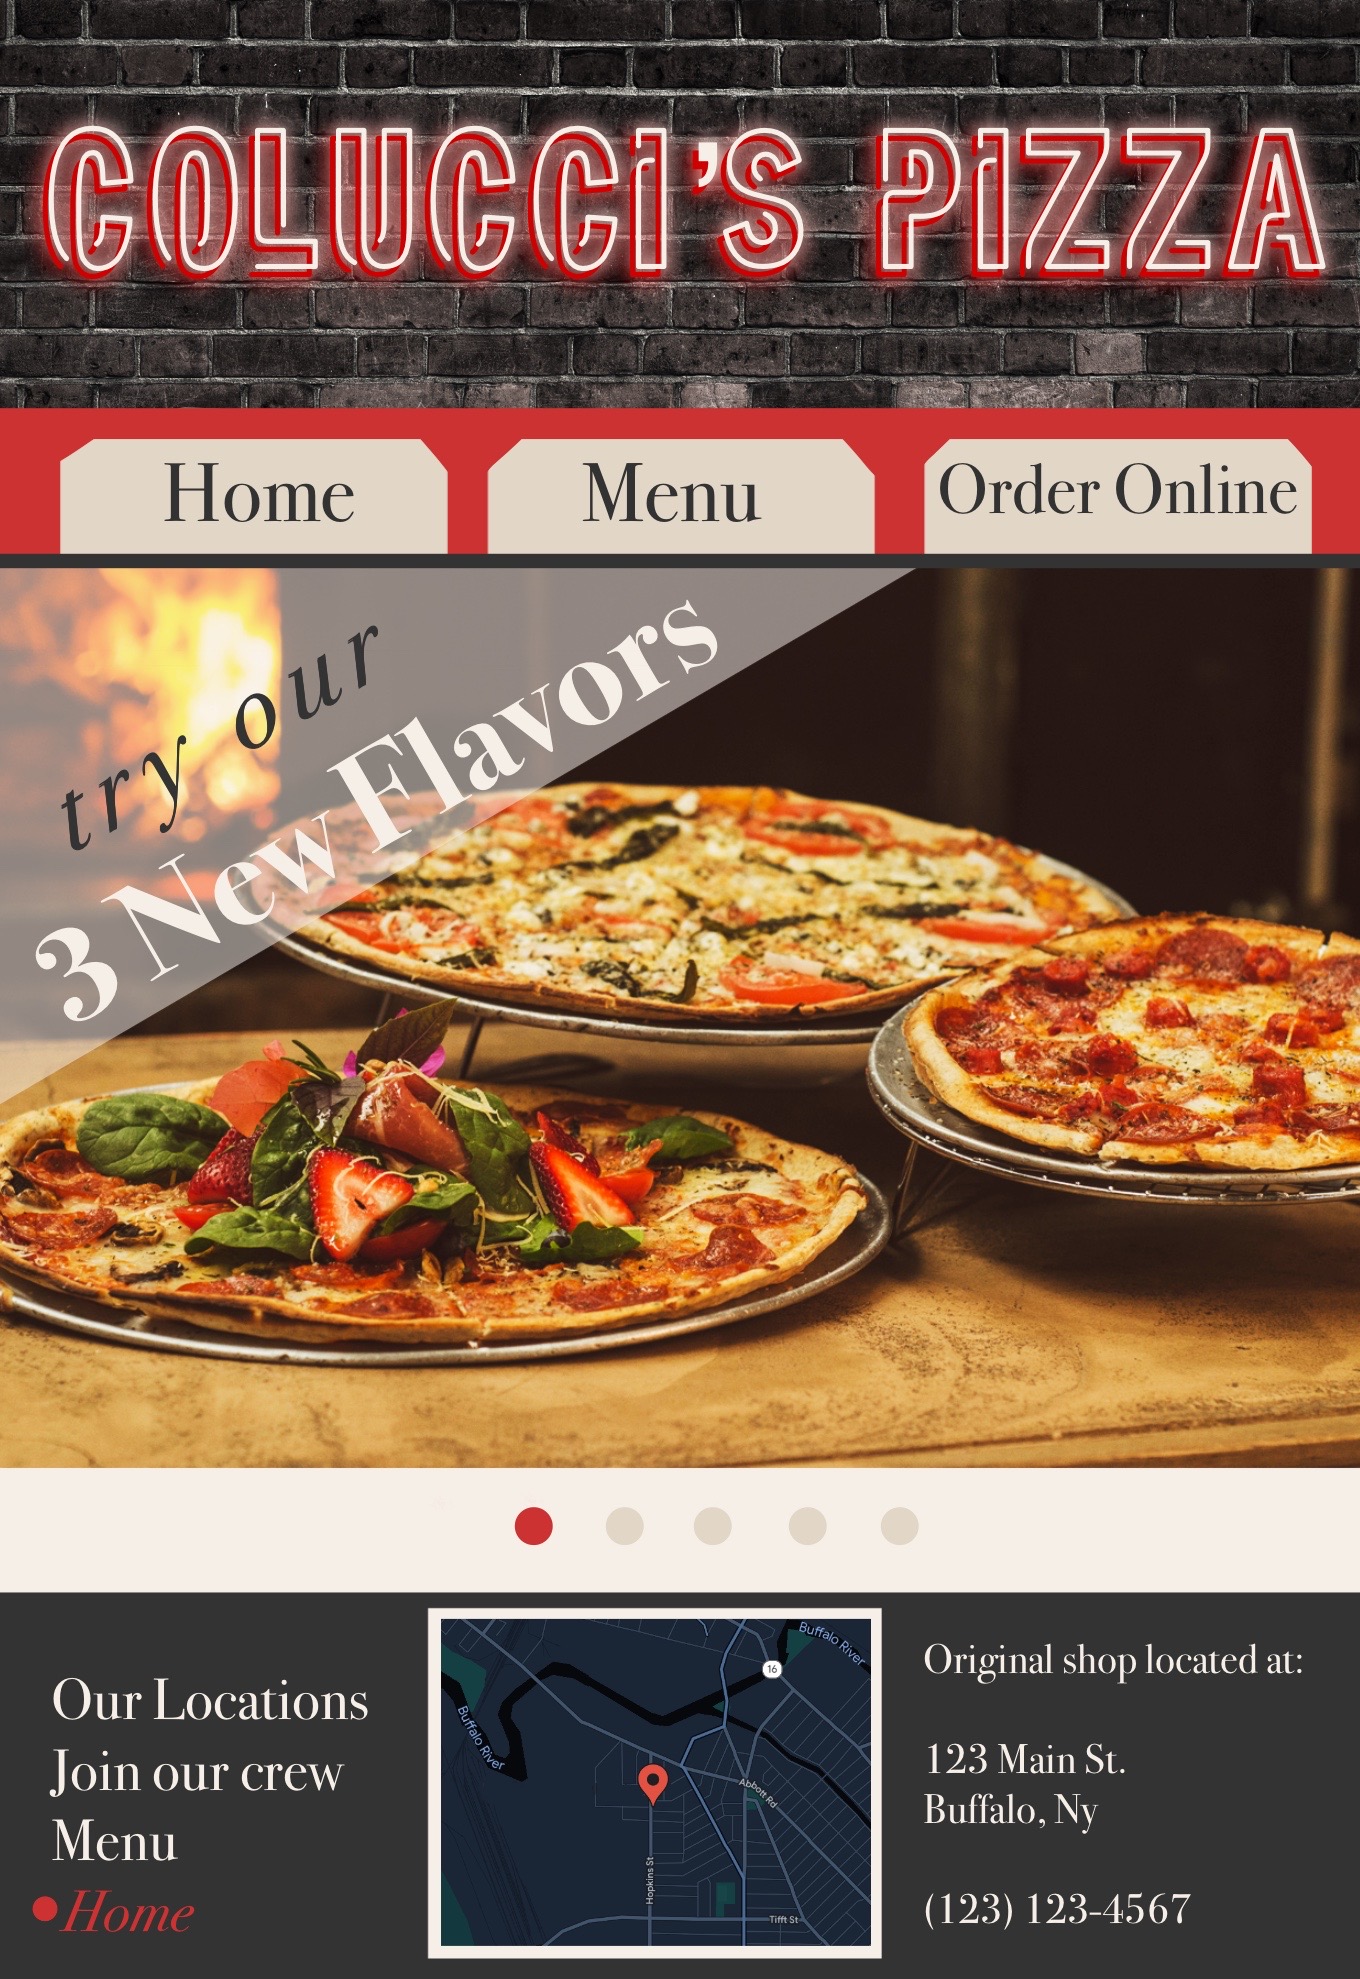 design mockup for a pizza shop website. depicting neon lettering against a brick background and a photo of pizza.